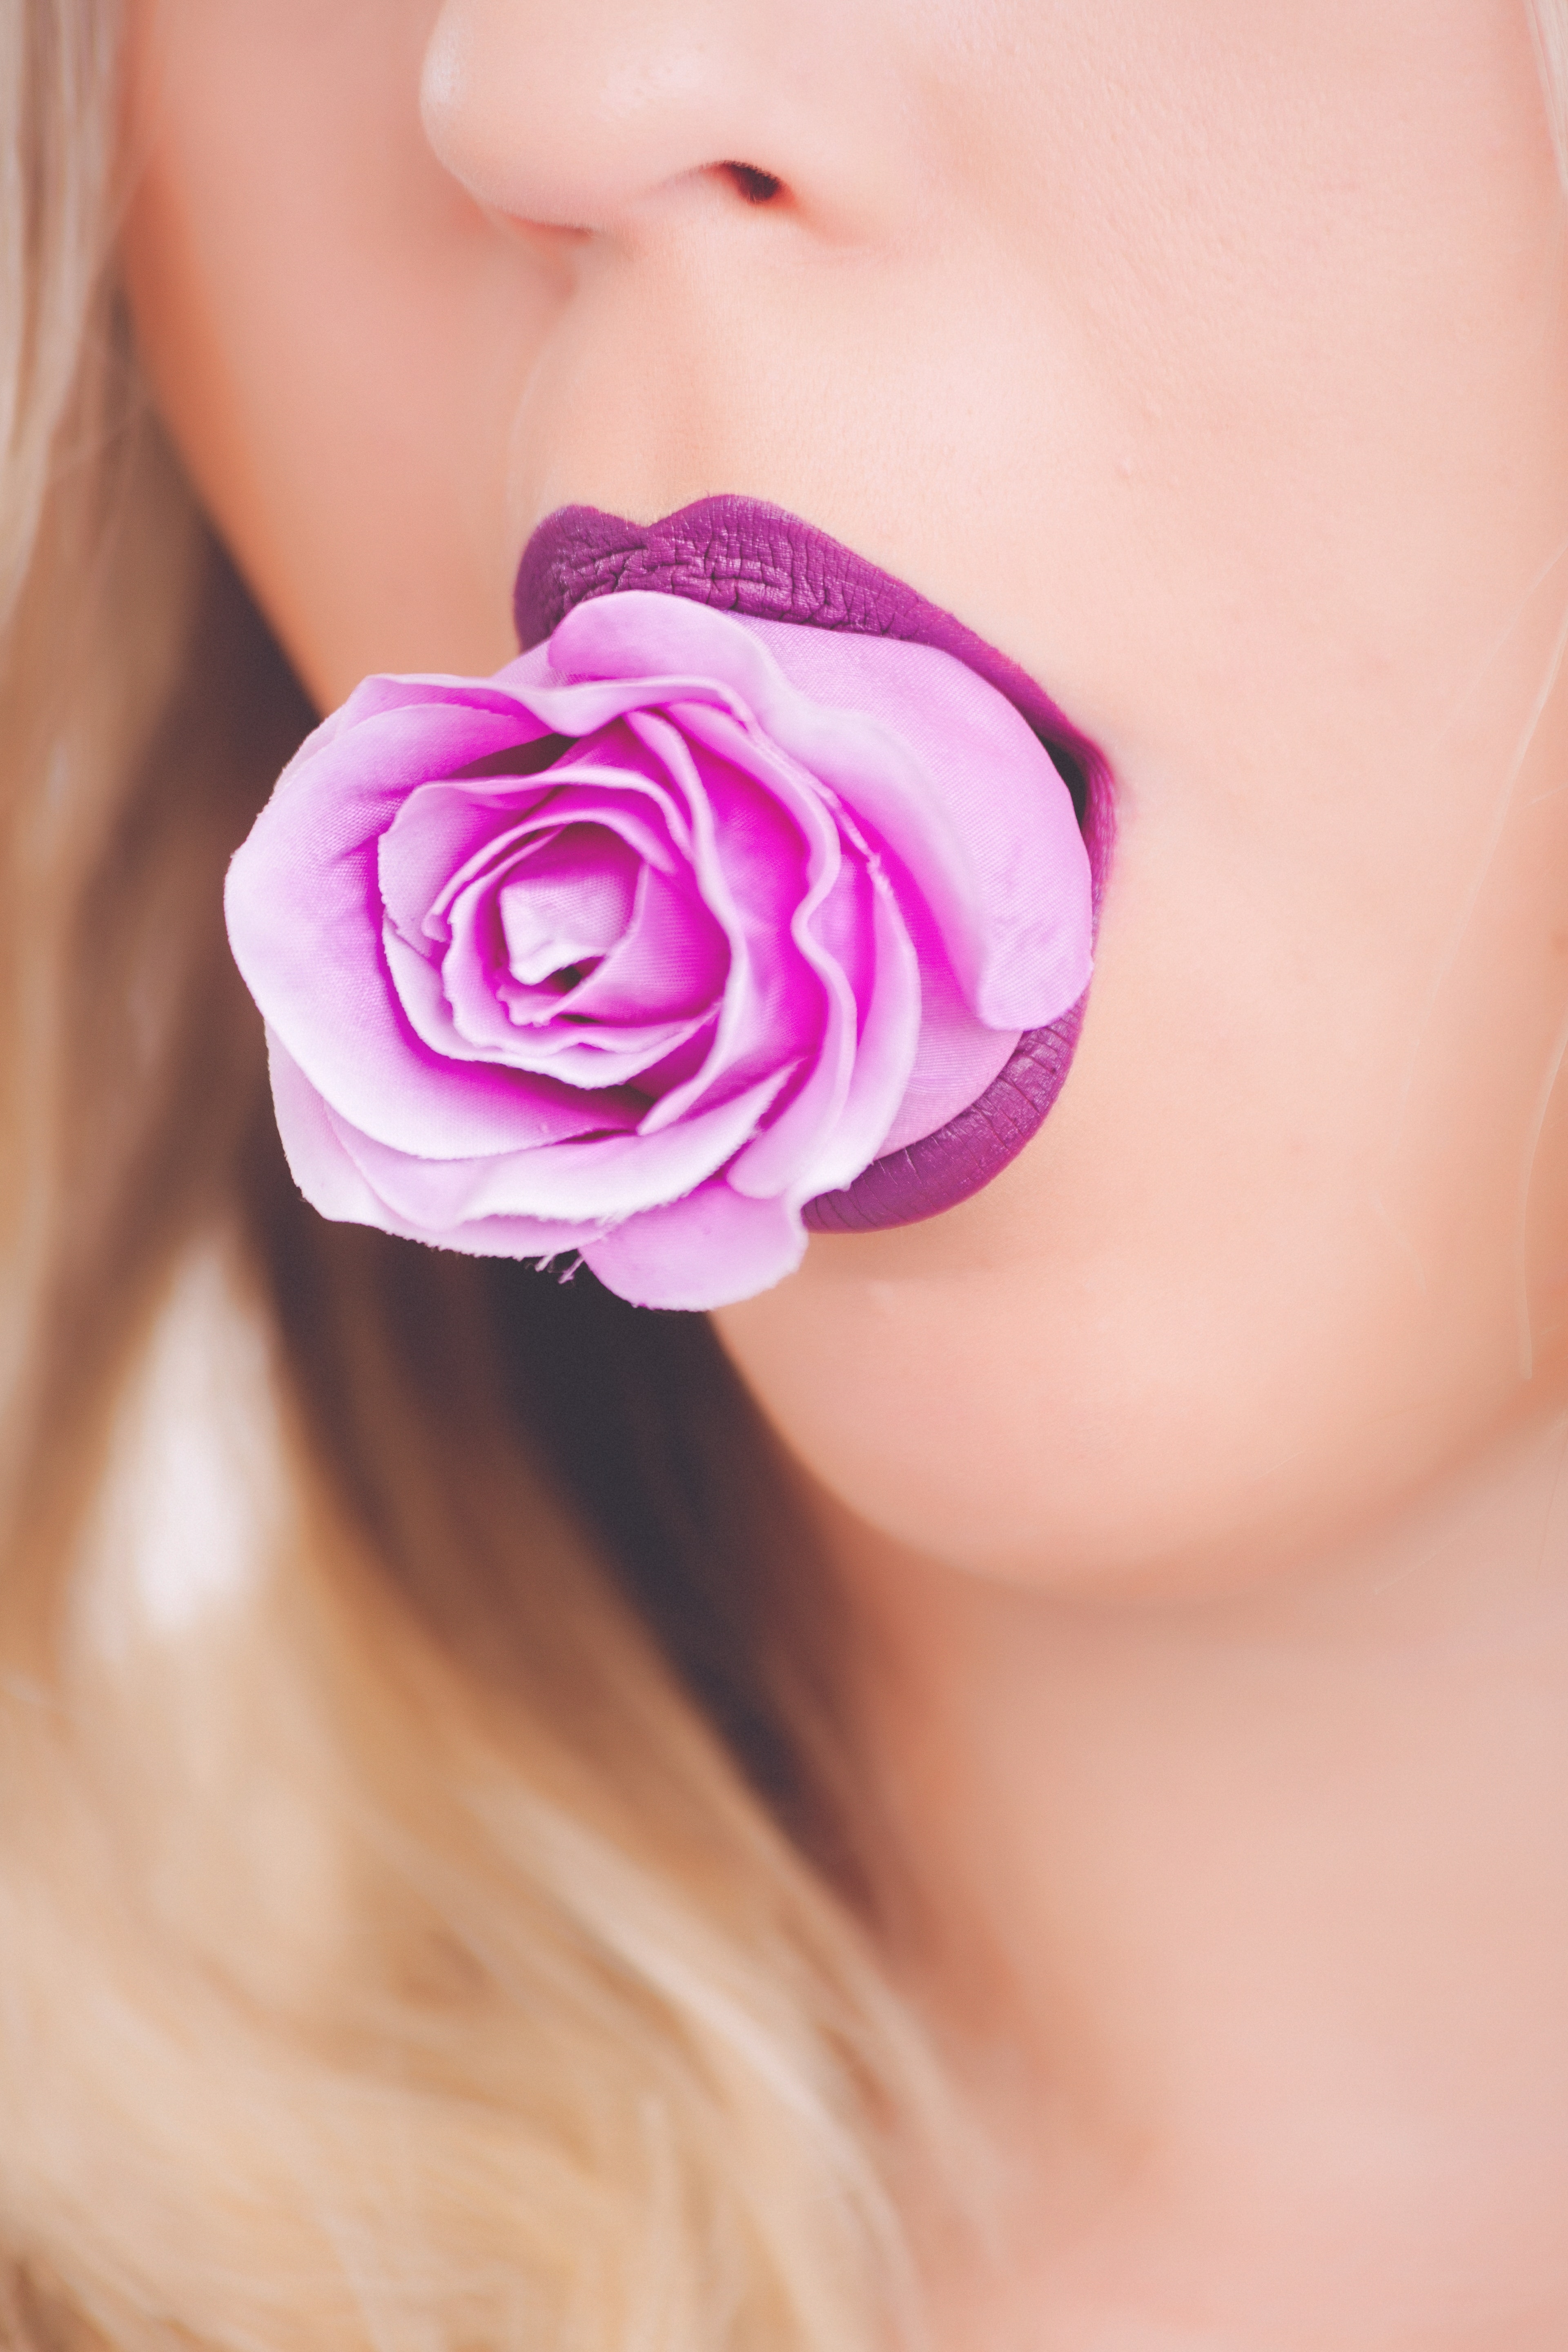 Pink rose flower on woman's mouth photo